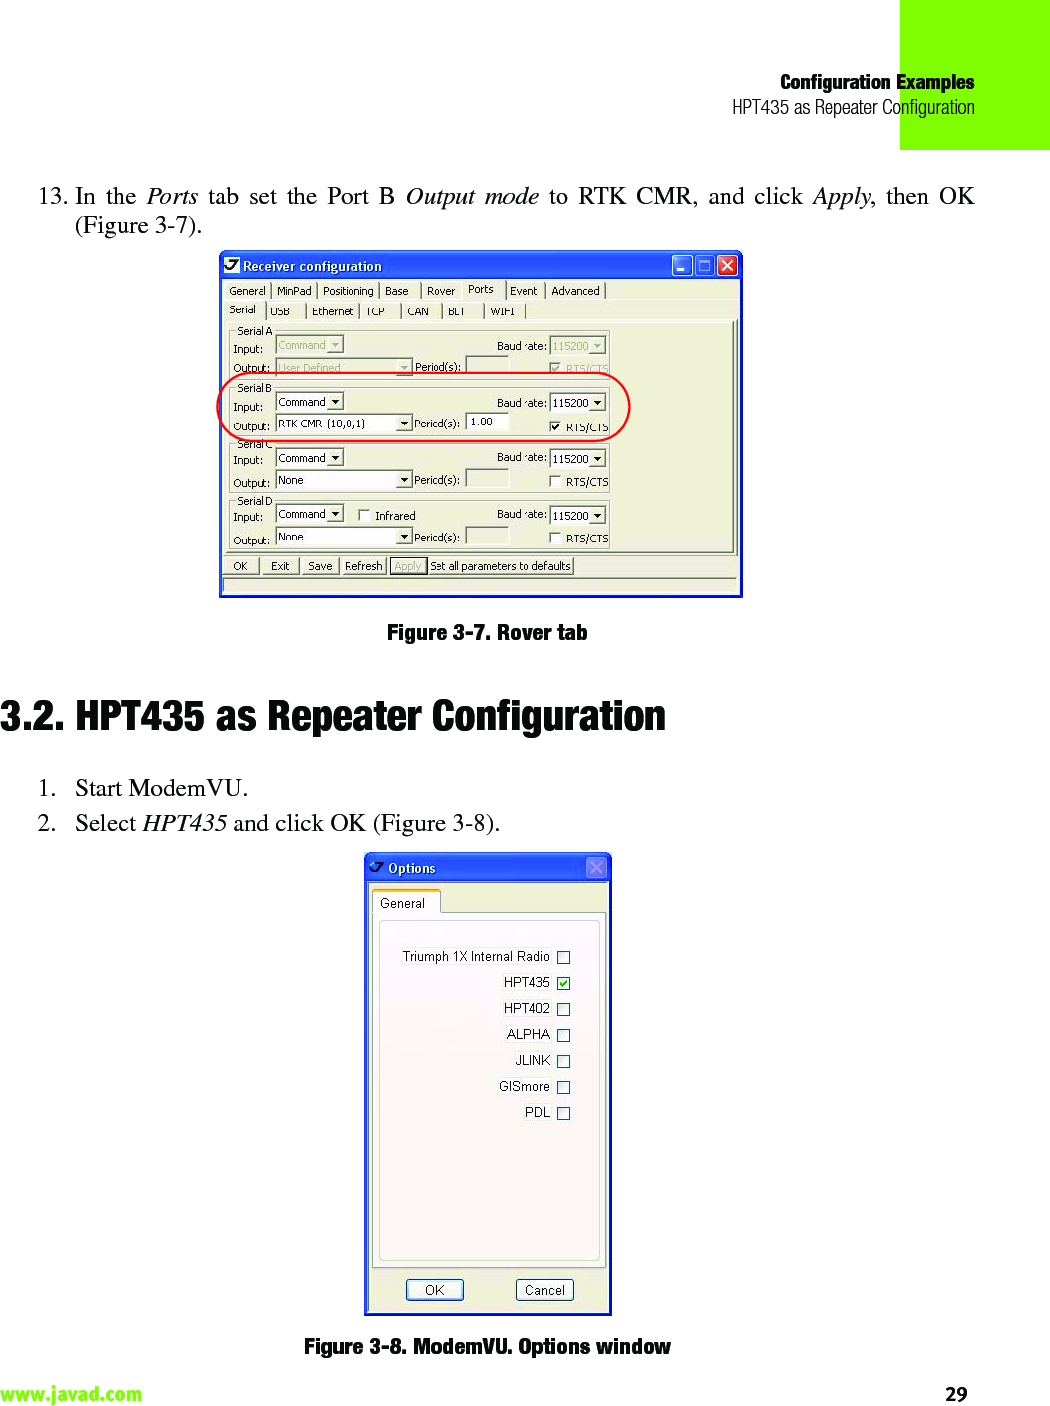 Configuration ExamplesHPT435 as Repeater Configuration29www.javad.com                                                                                                                                                    13. In the Ports tab set the Port B Output mode to RTK CMR, and click Apply, then OK(Figure 3-7).Figure 3-7. Rover tab3.2. HPT435 as Repeater Configuration1. Start ModemVU.2. Select HPT435 and click OK (Figure 3-8).Figure 3-8. ModemVU. Options window